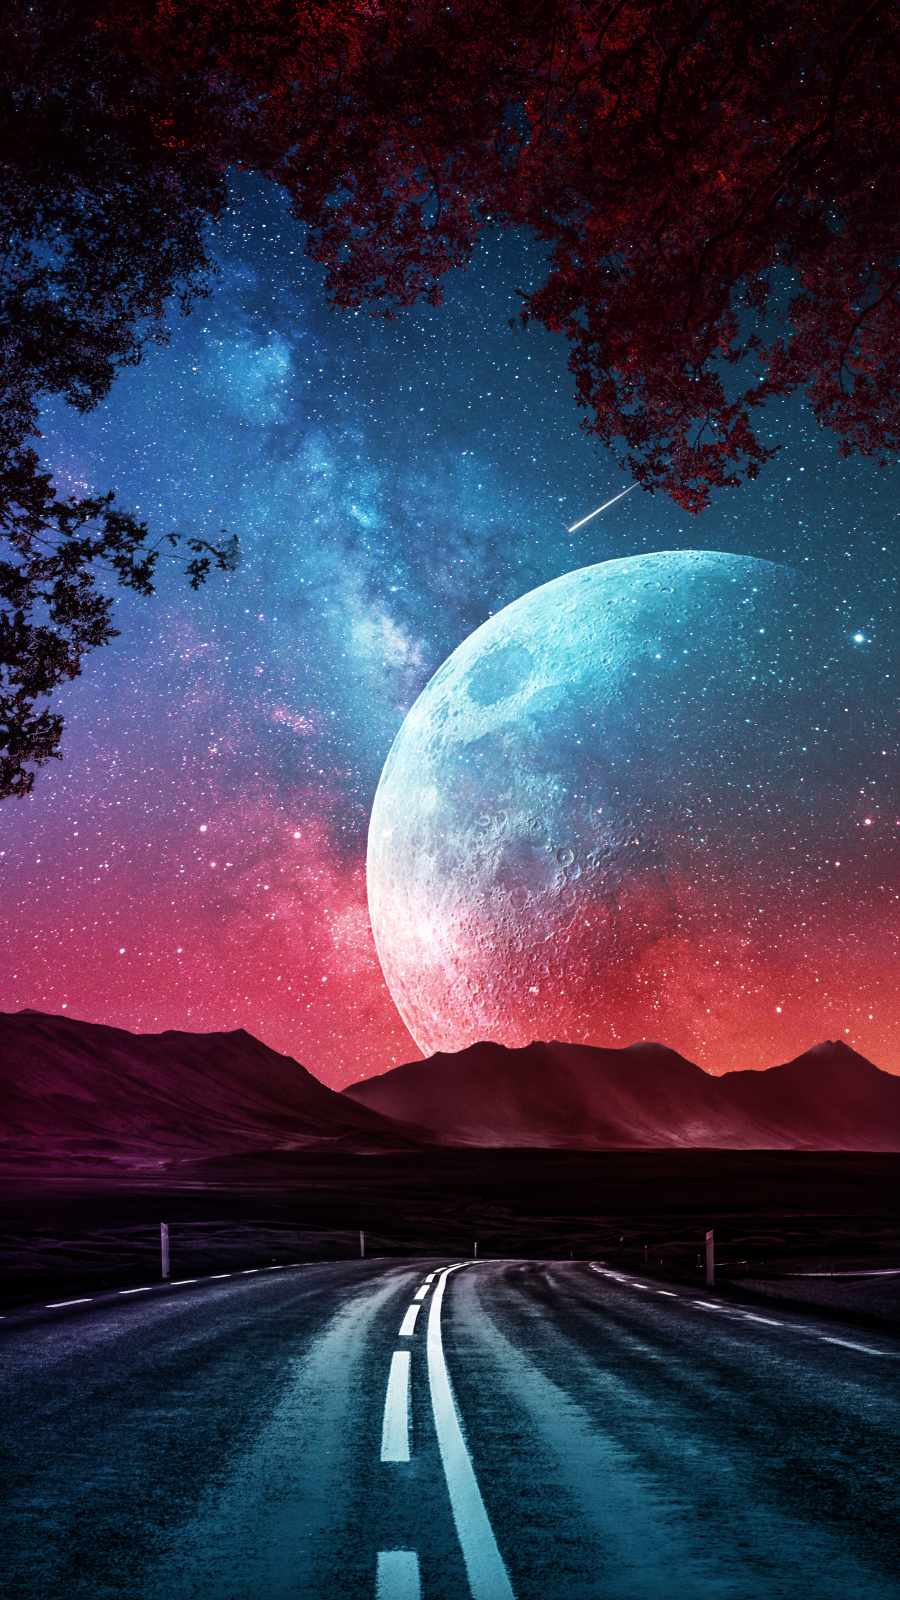 Moon Iphone Wallpaper Images  Free Photos PNG Stickers Wallpapers   Backgrounds  rawpixel